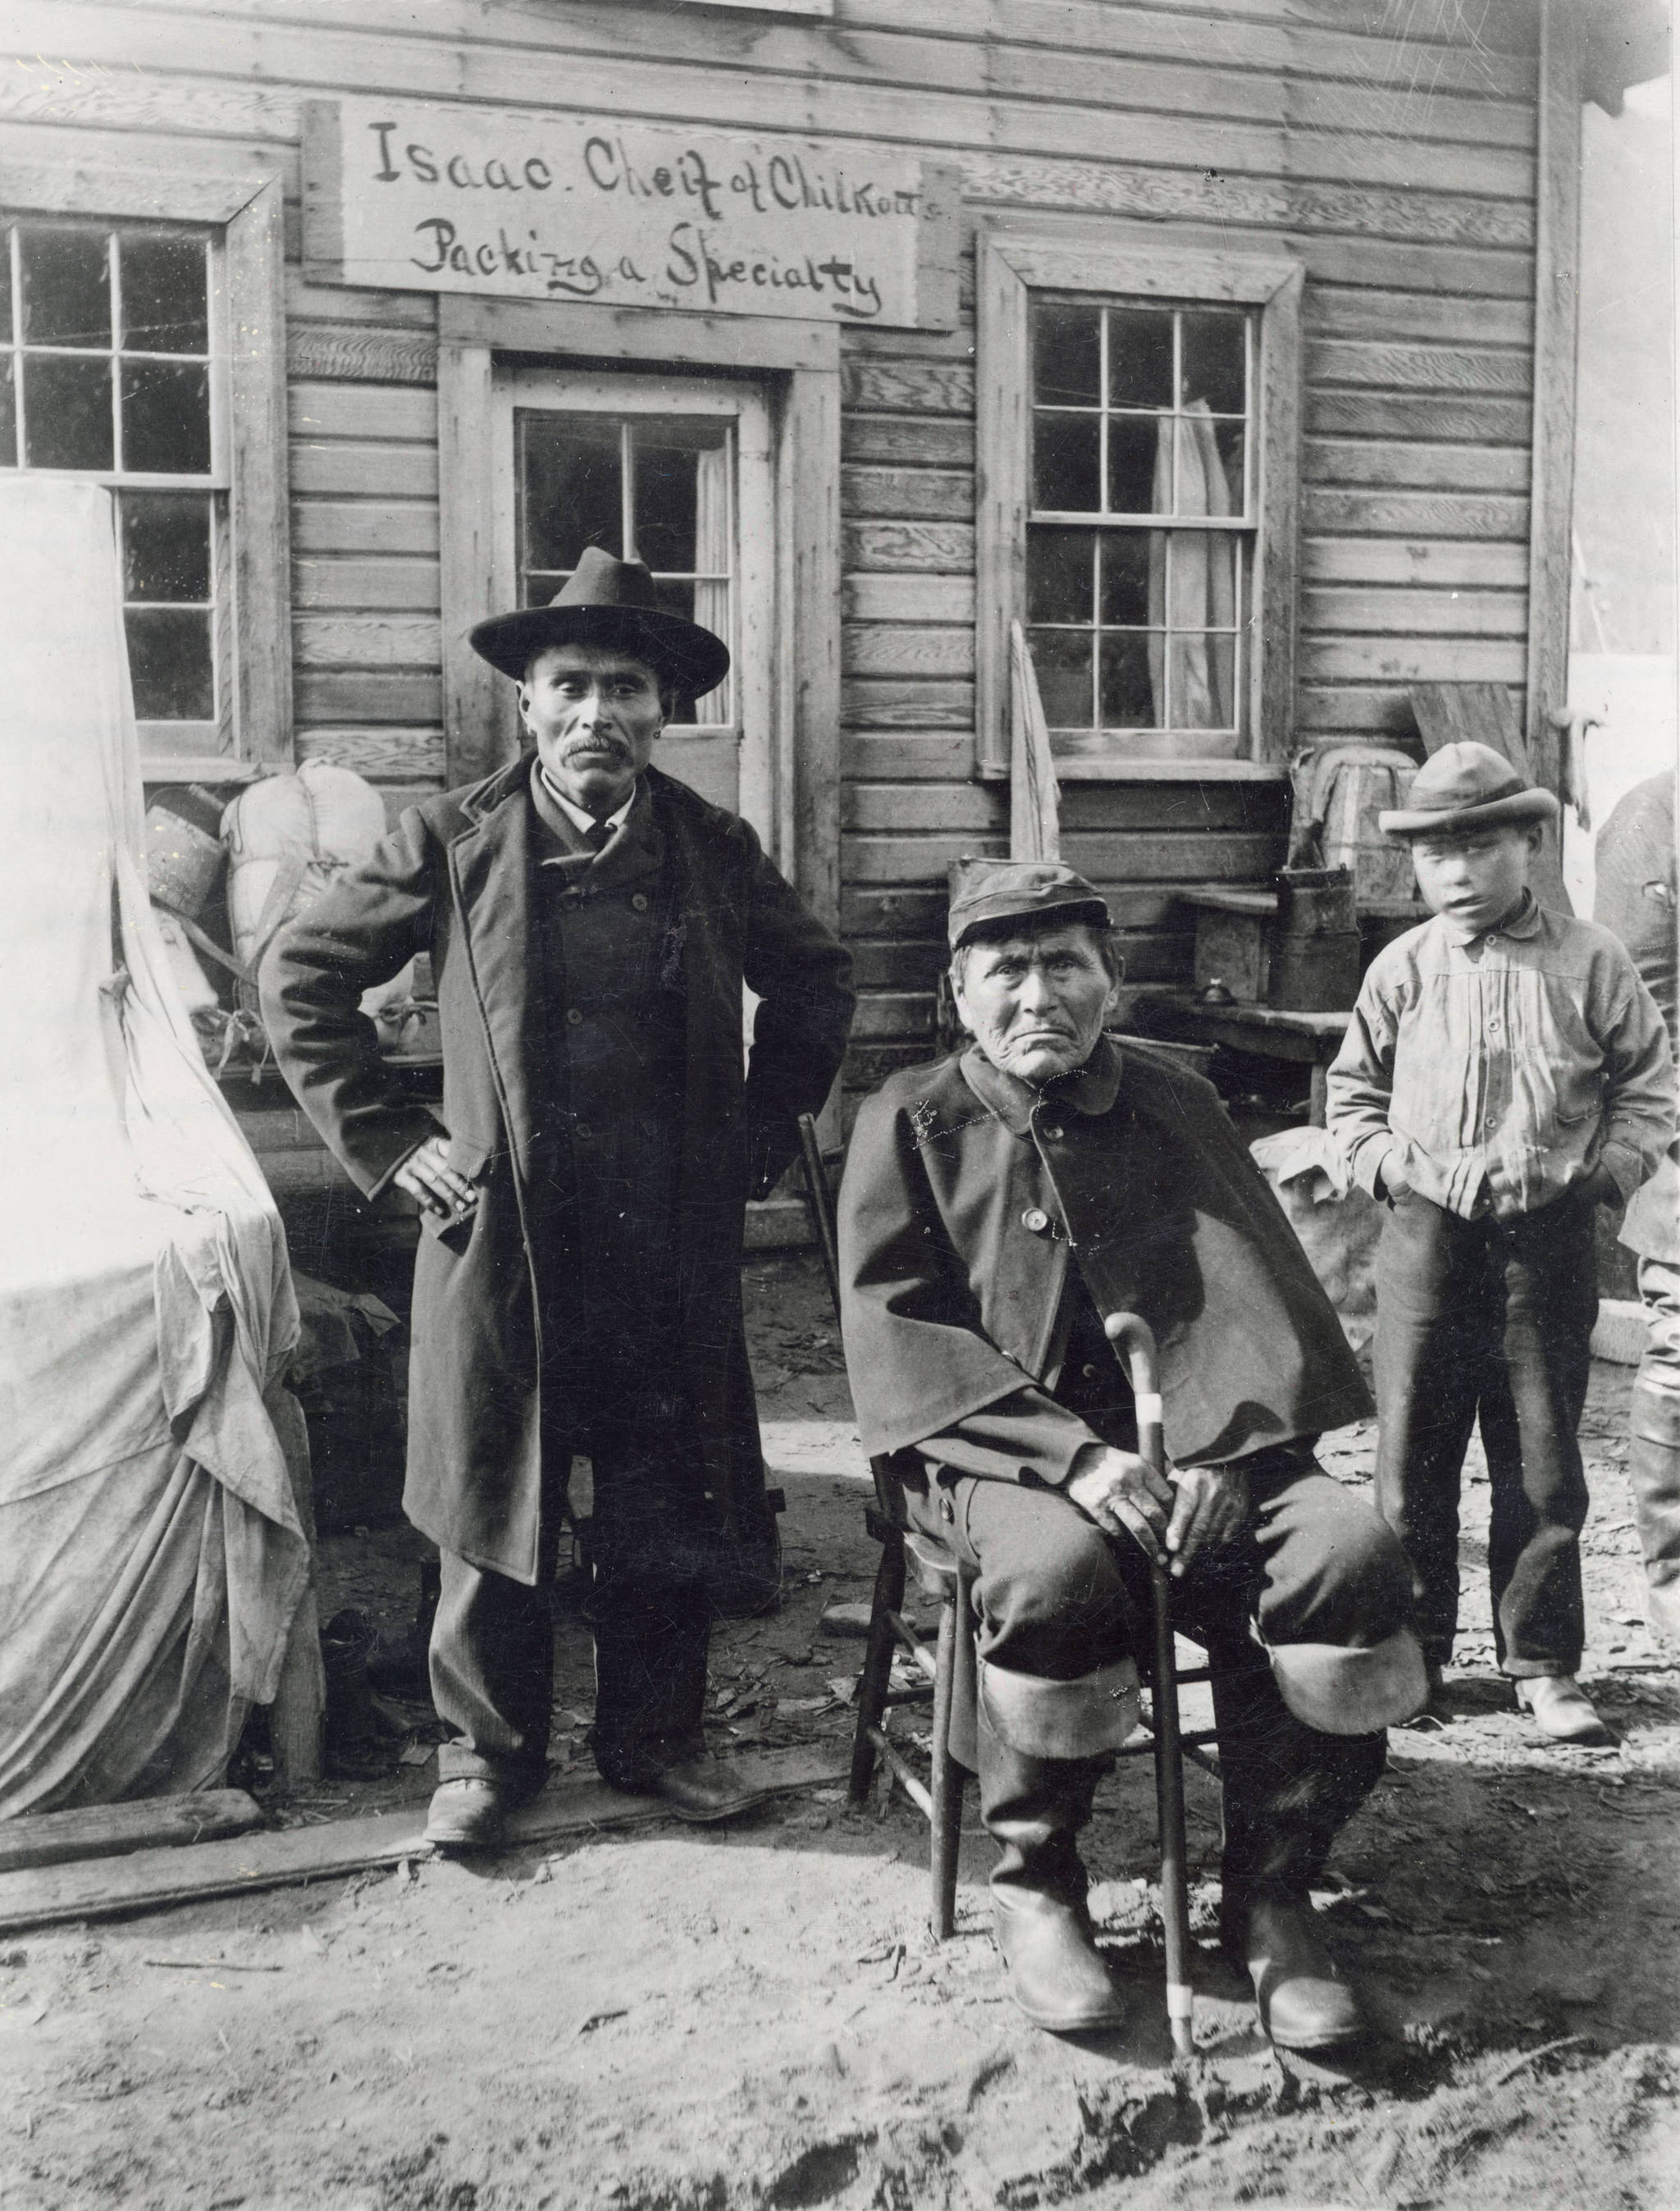 Chief Isaac, left, and Don-a-wok, center, in front of their store in Dyea in 1897. (Library of Congress, 29265/262-30261 MM III-2; KLGO HW-18-1436)